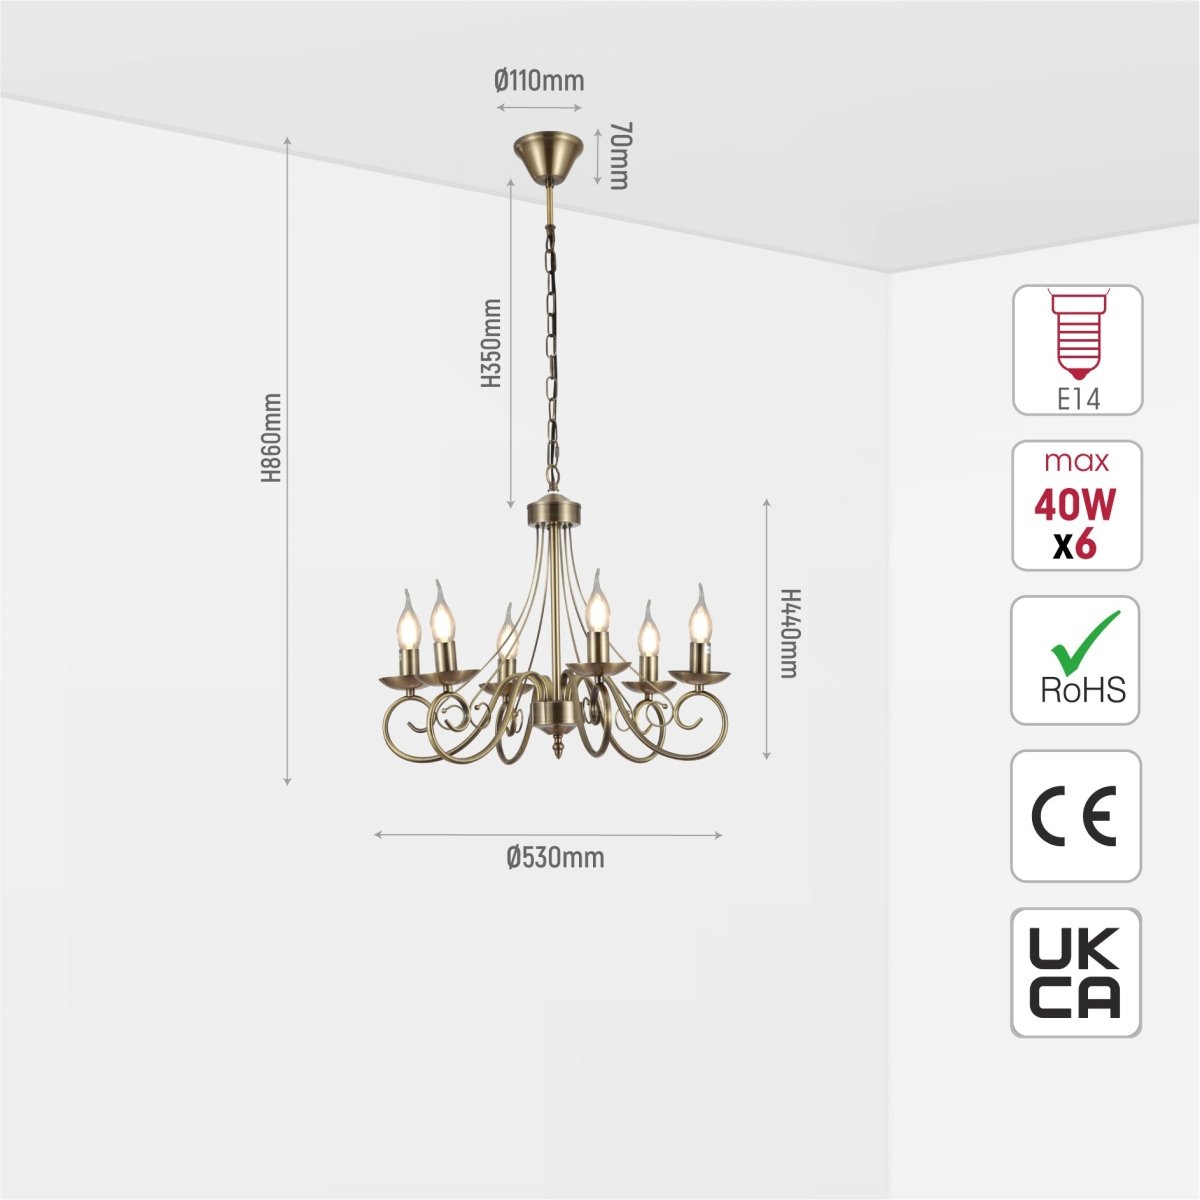 Size and specs of Candle Vintage Antique Brass French Chandelier Ceiling Light 3xE14 | TEKLED 152-17619